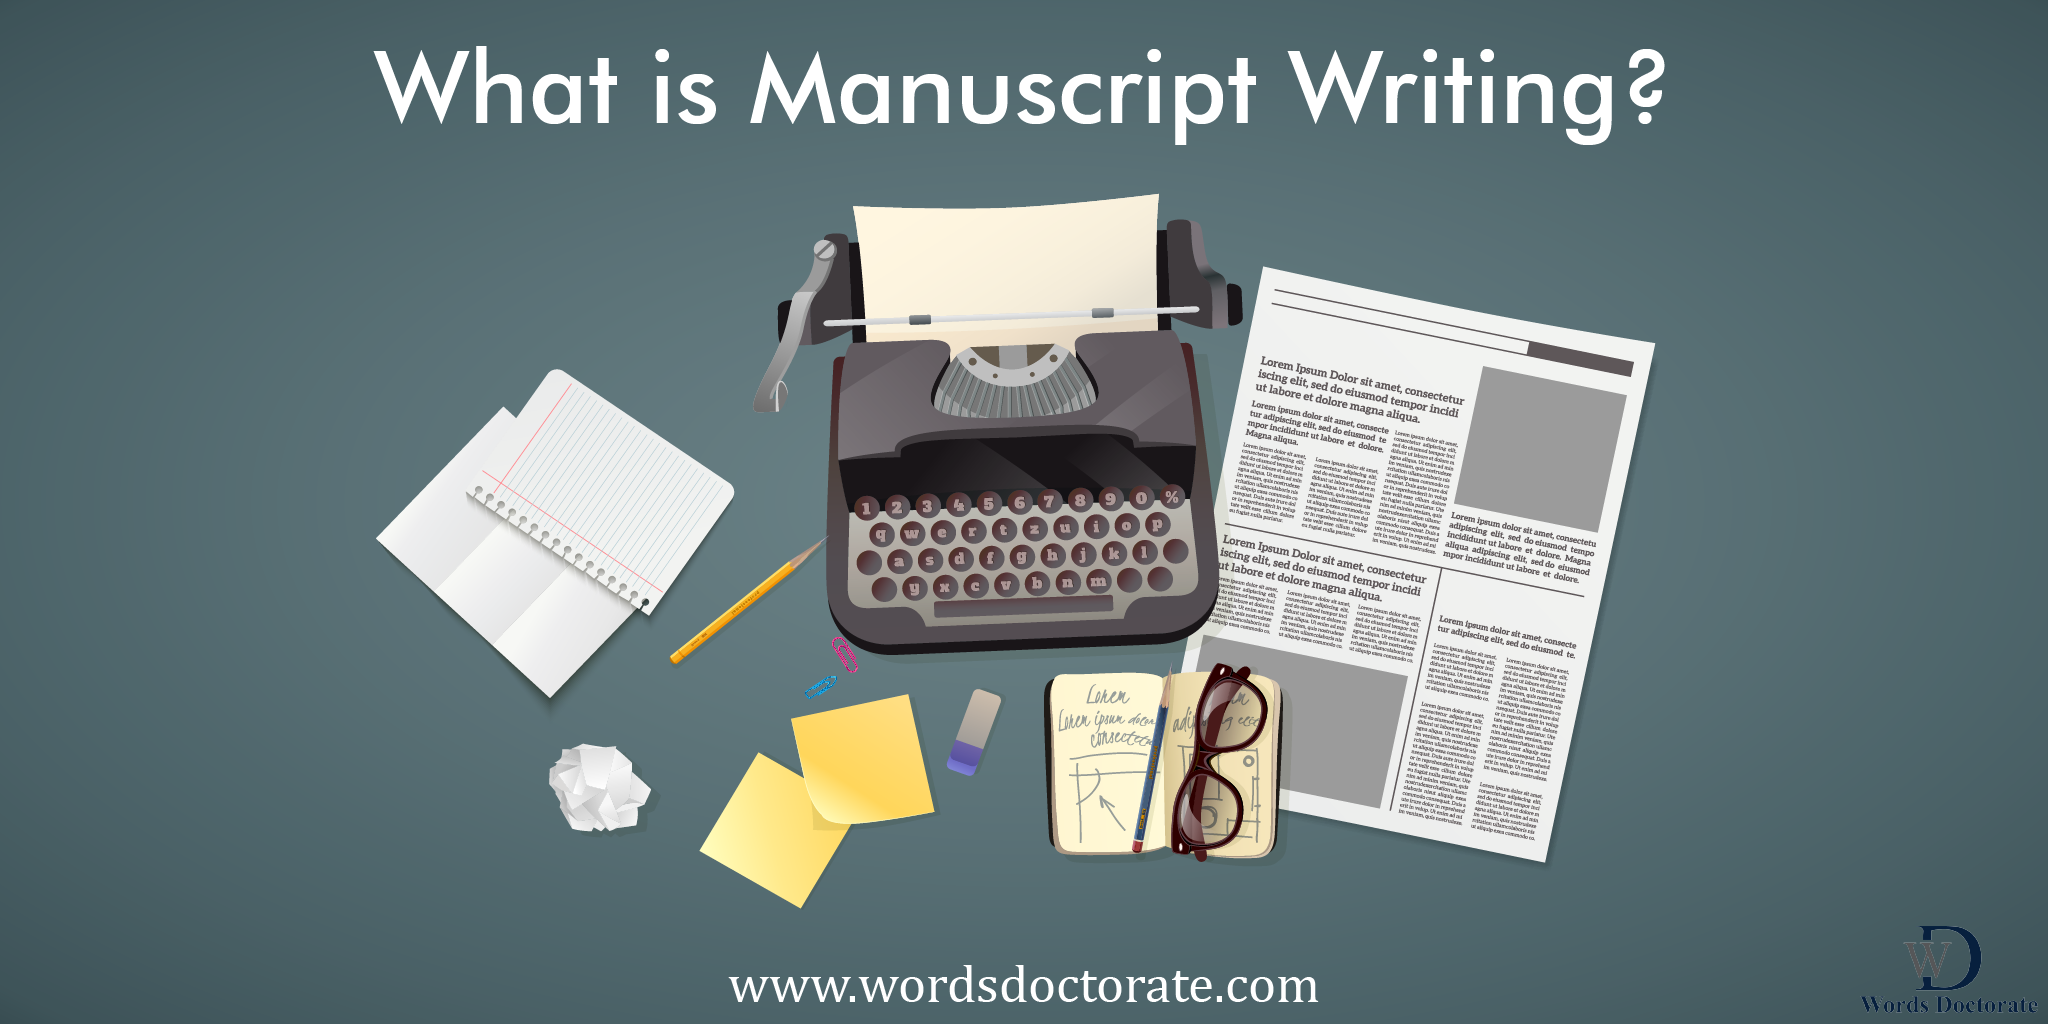 What is Manuscript Writing?